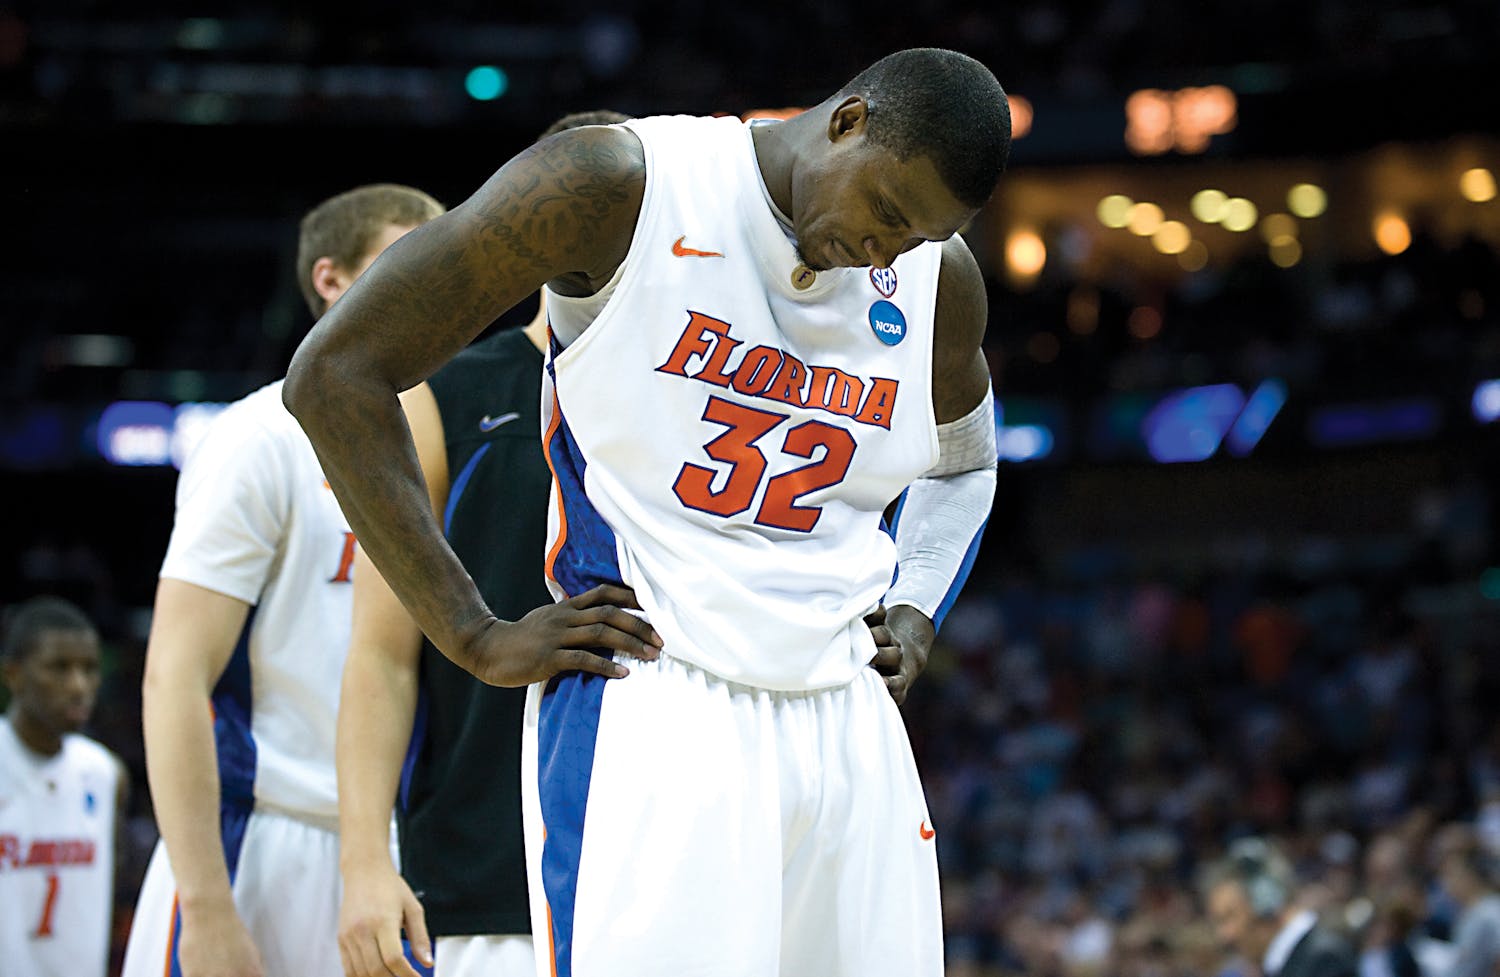 Florida senior center Vernon Macklin hangs his head after the Gators fell 74-71 in overtime to Butler on Saturday in New Orleans Arena. UF was one win away from the Final Four but couldn’t overcome the Bulldogs.